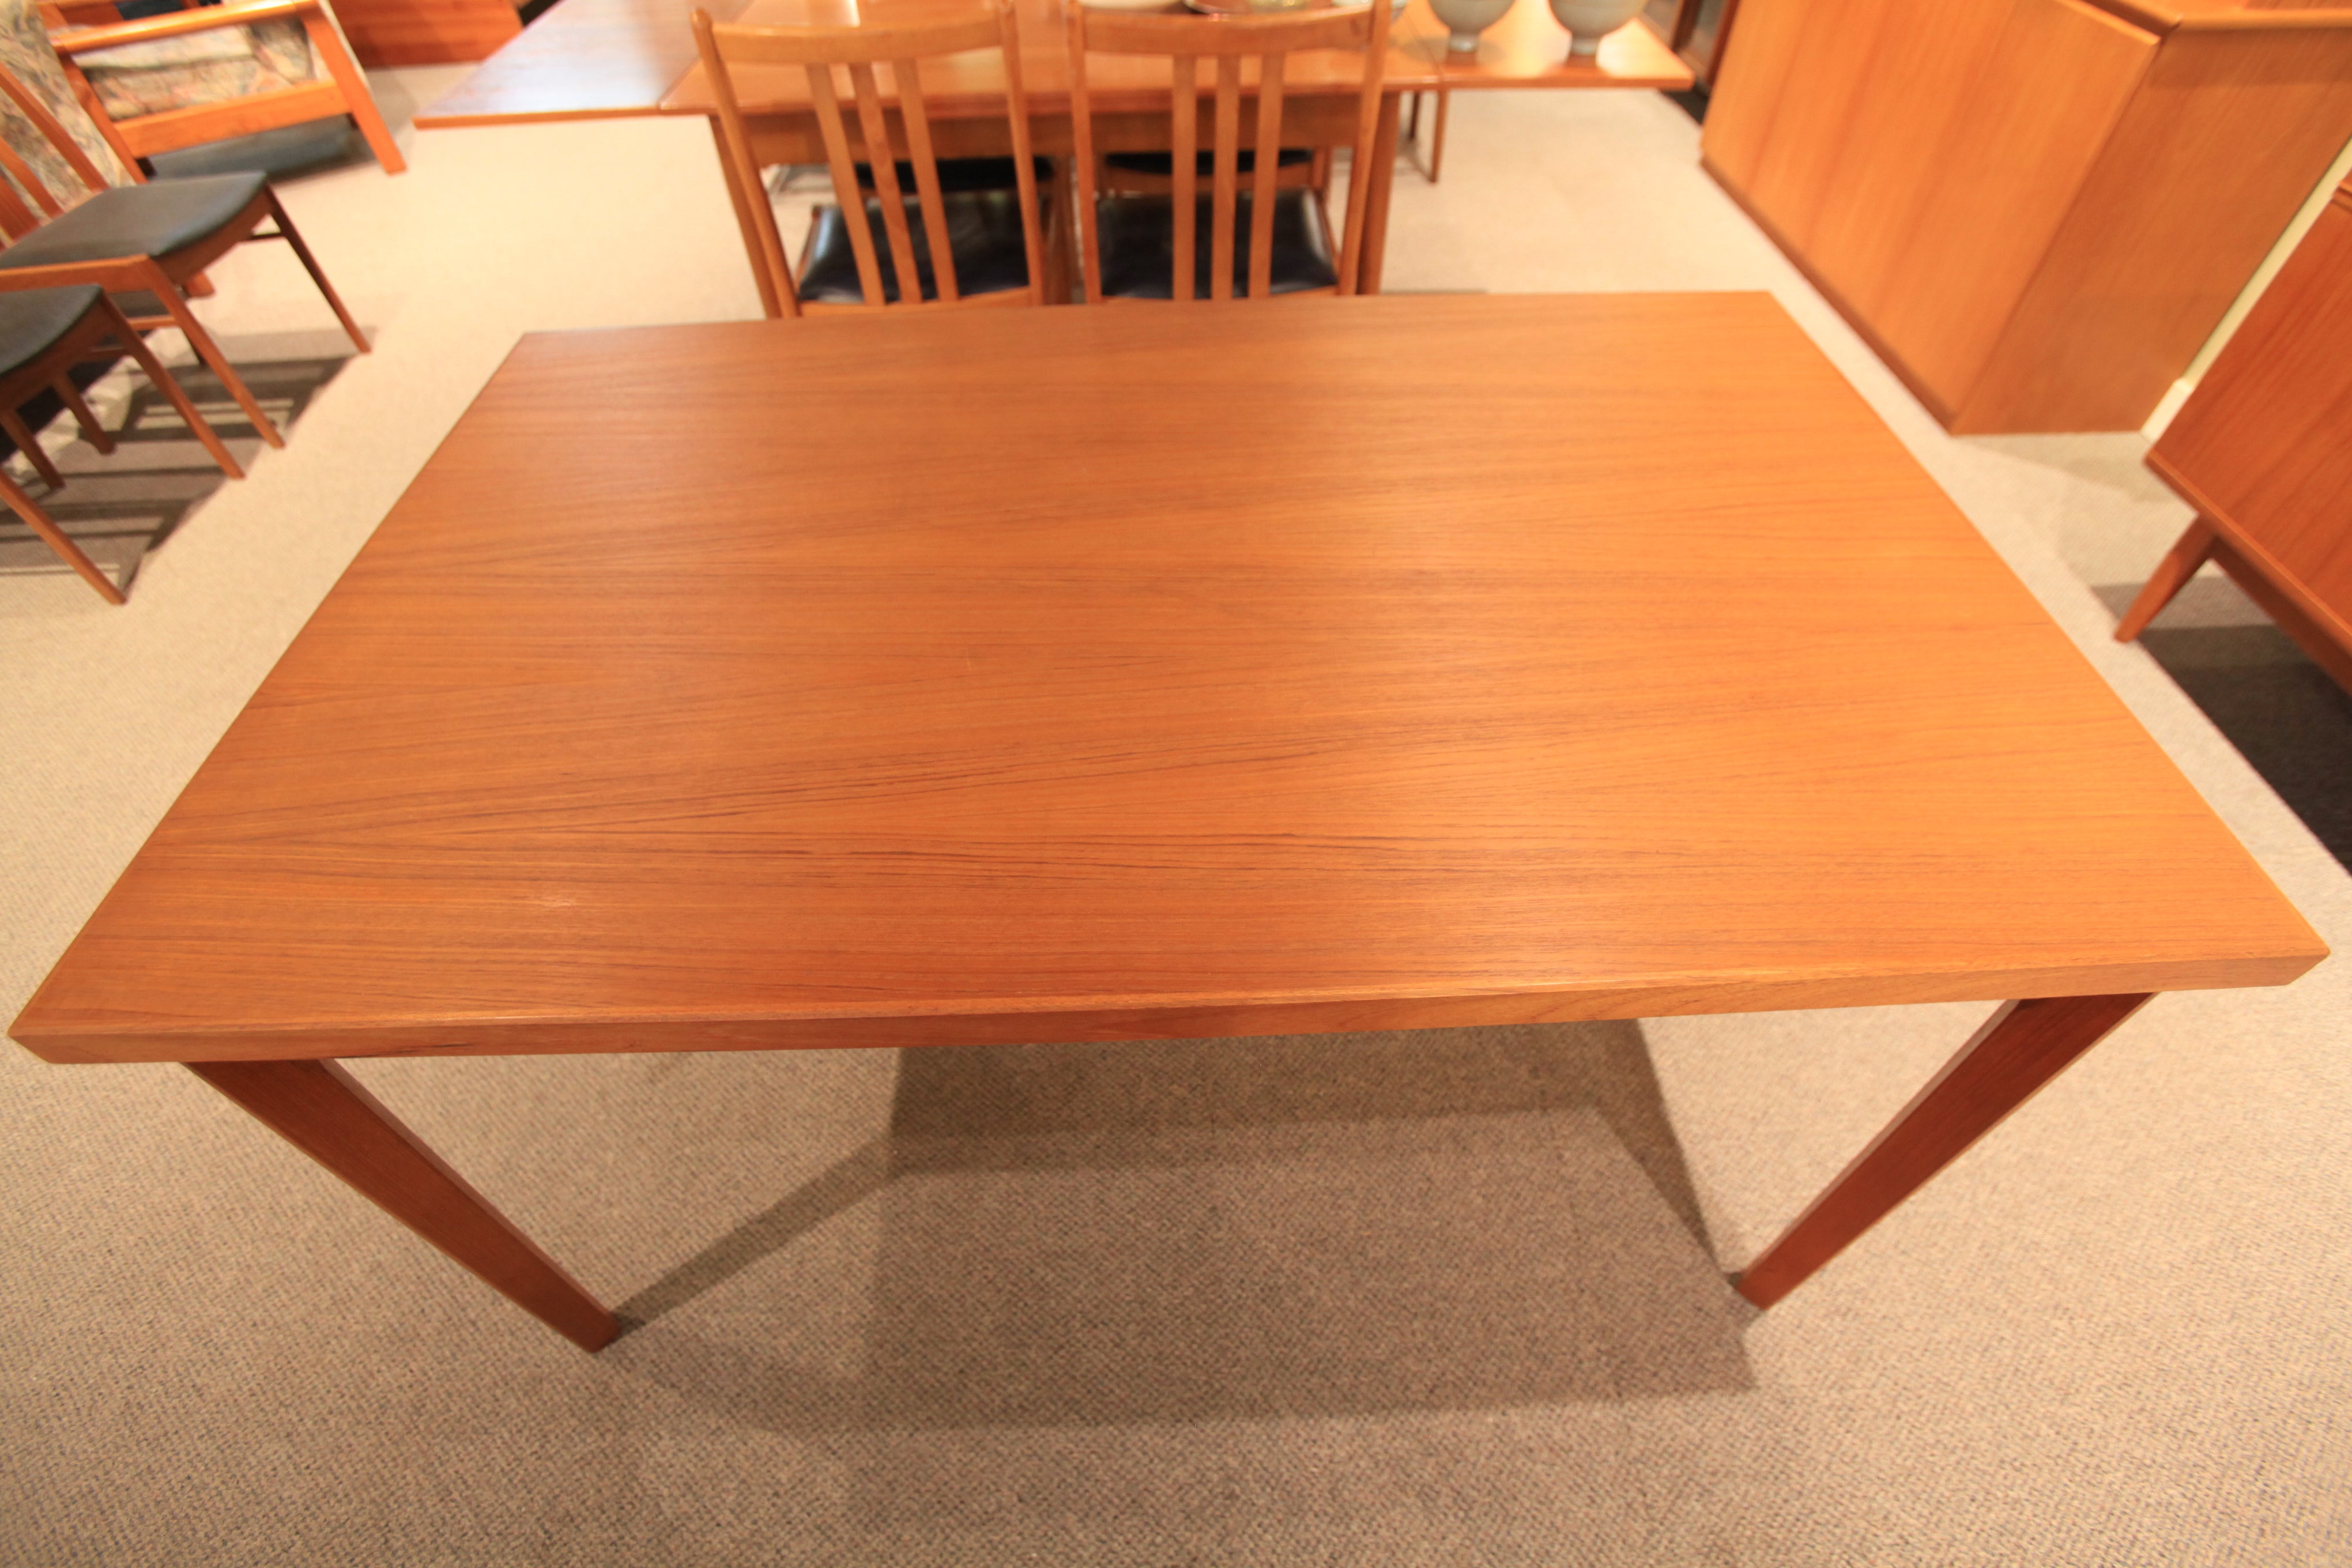 Vintage Danish Teak Dining Table w/ Pullout Extensions (53.5 x 33.5) (93.25 x 33.5)